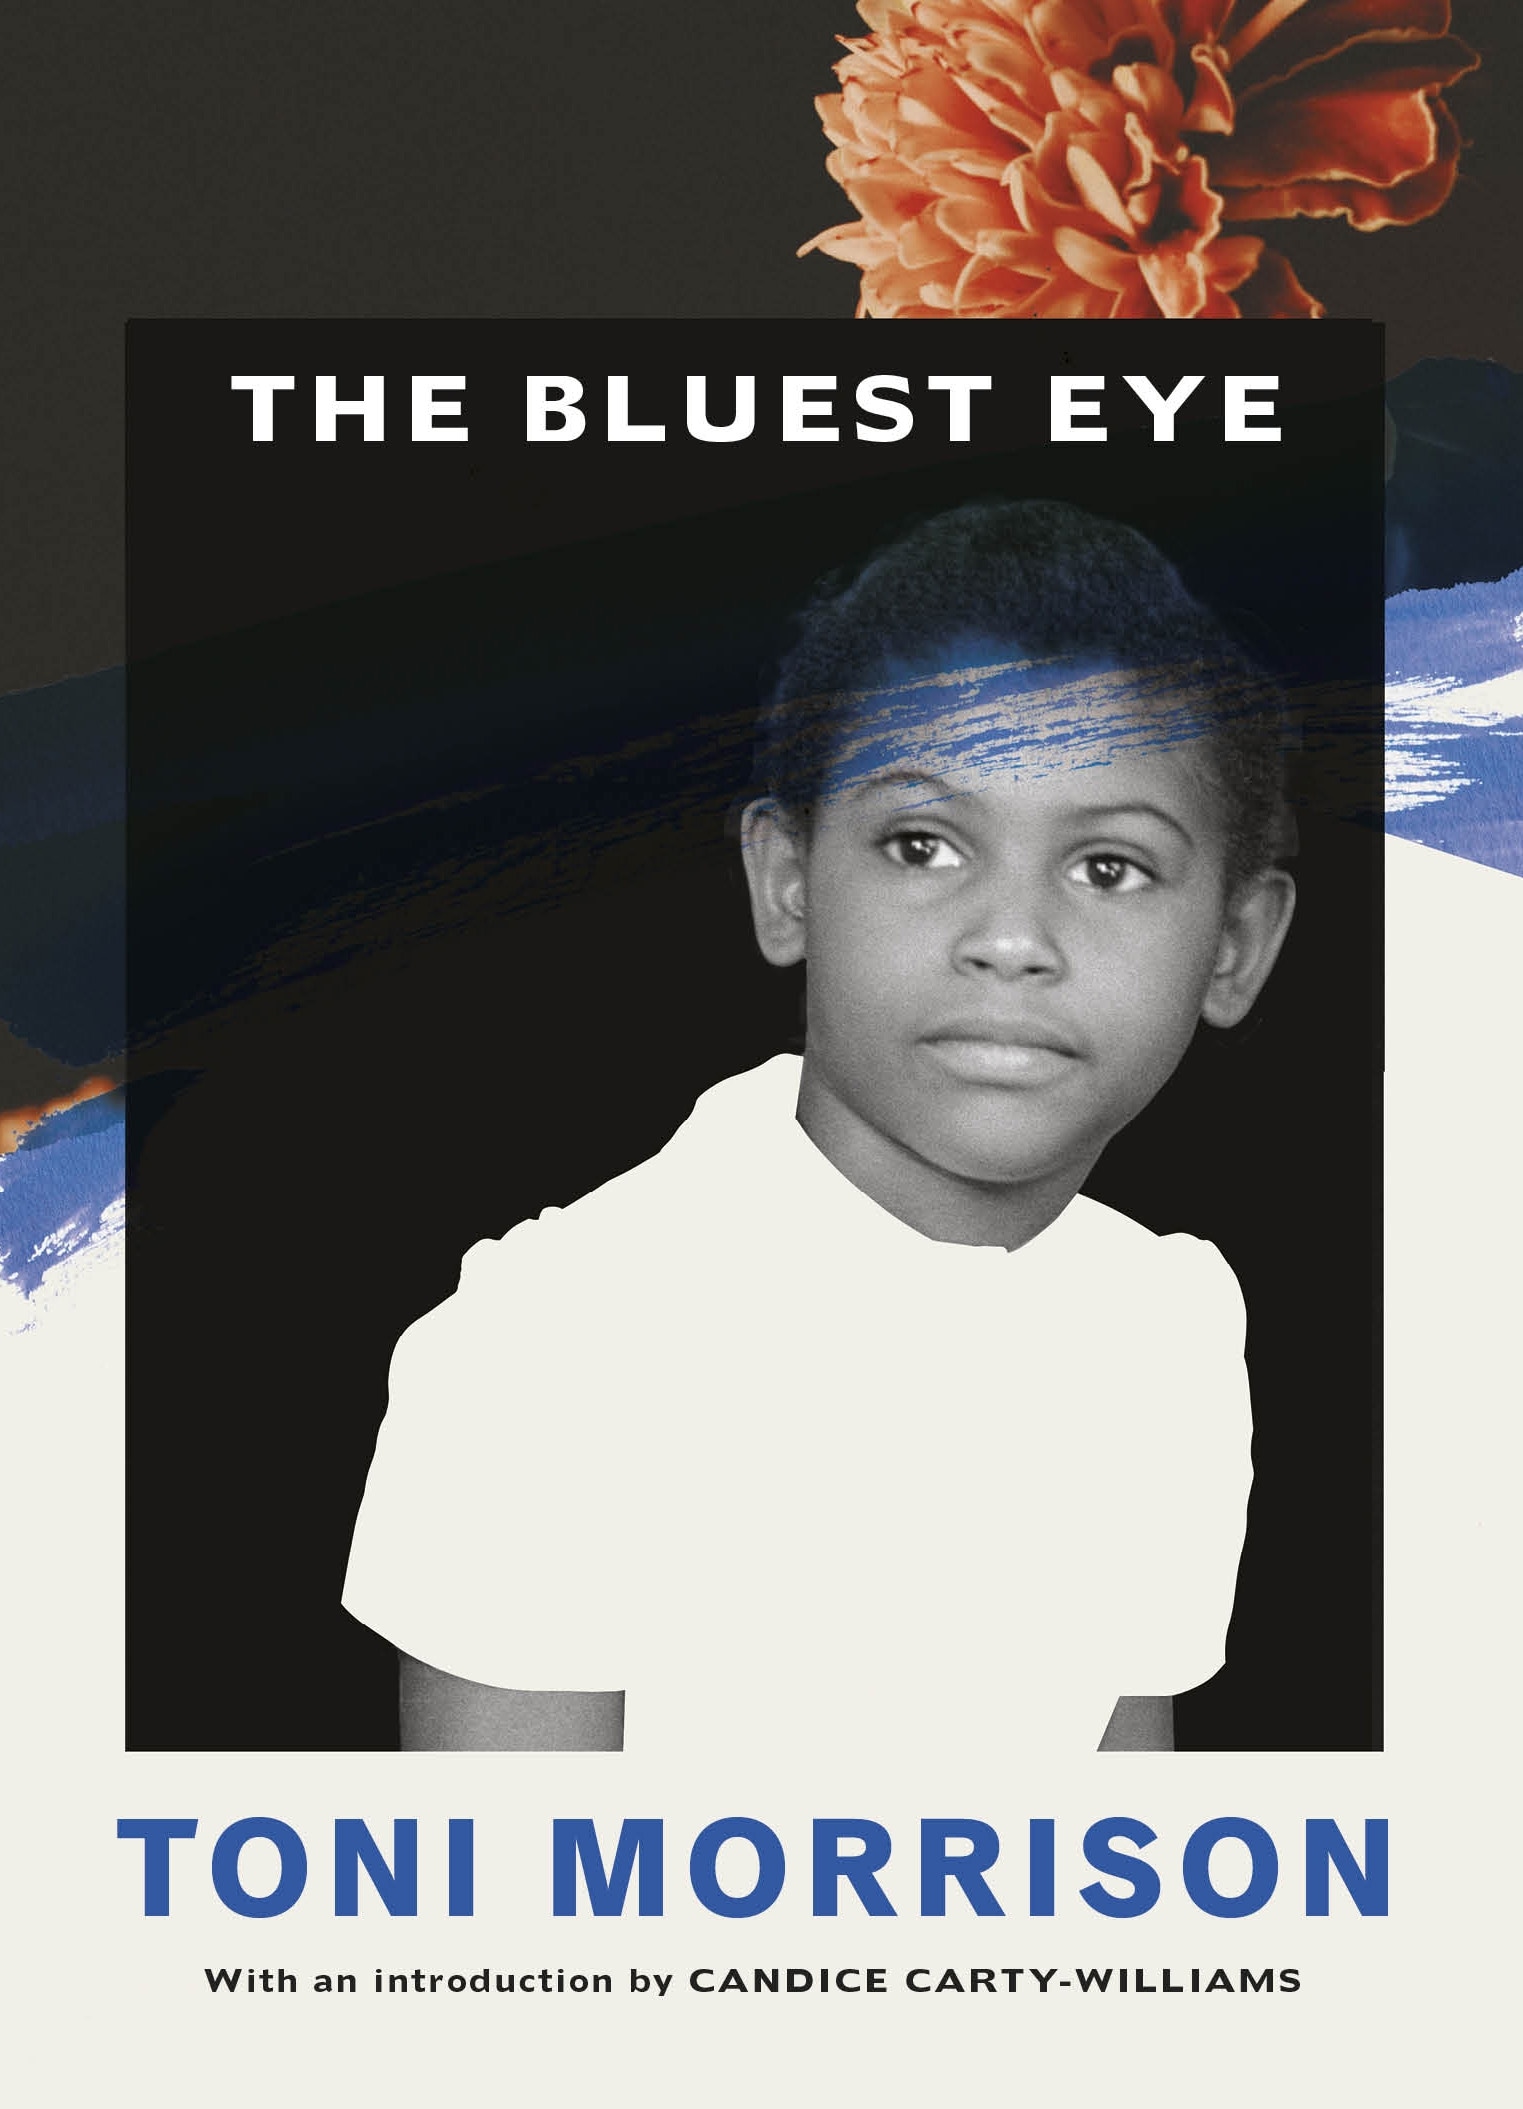 Book “The Bluest Eye” by Toni Morrison, Candice Carty-Williams — February 3, 2022